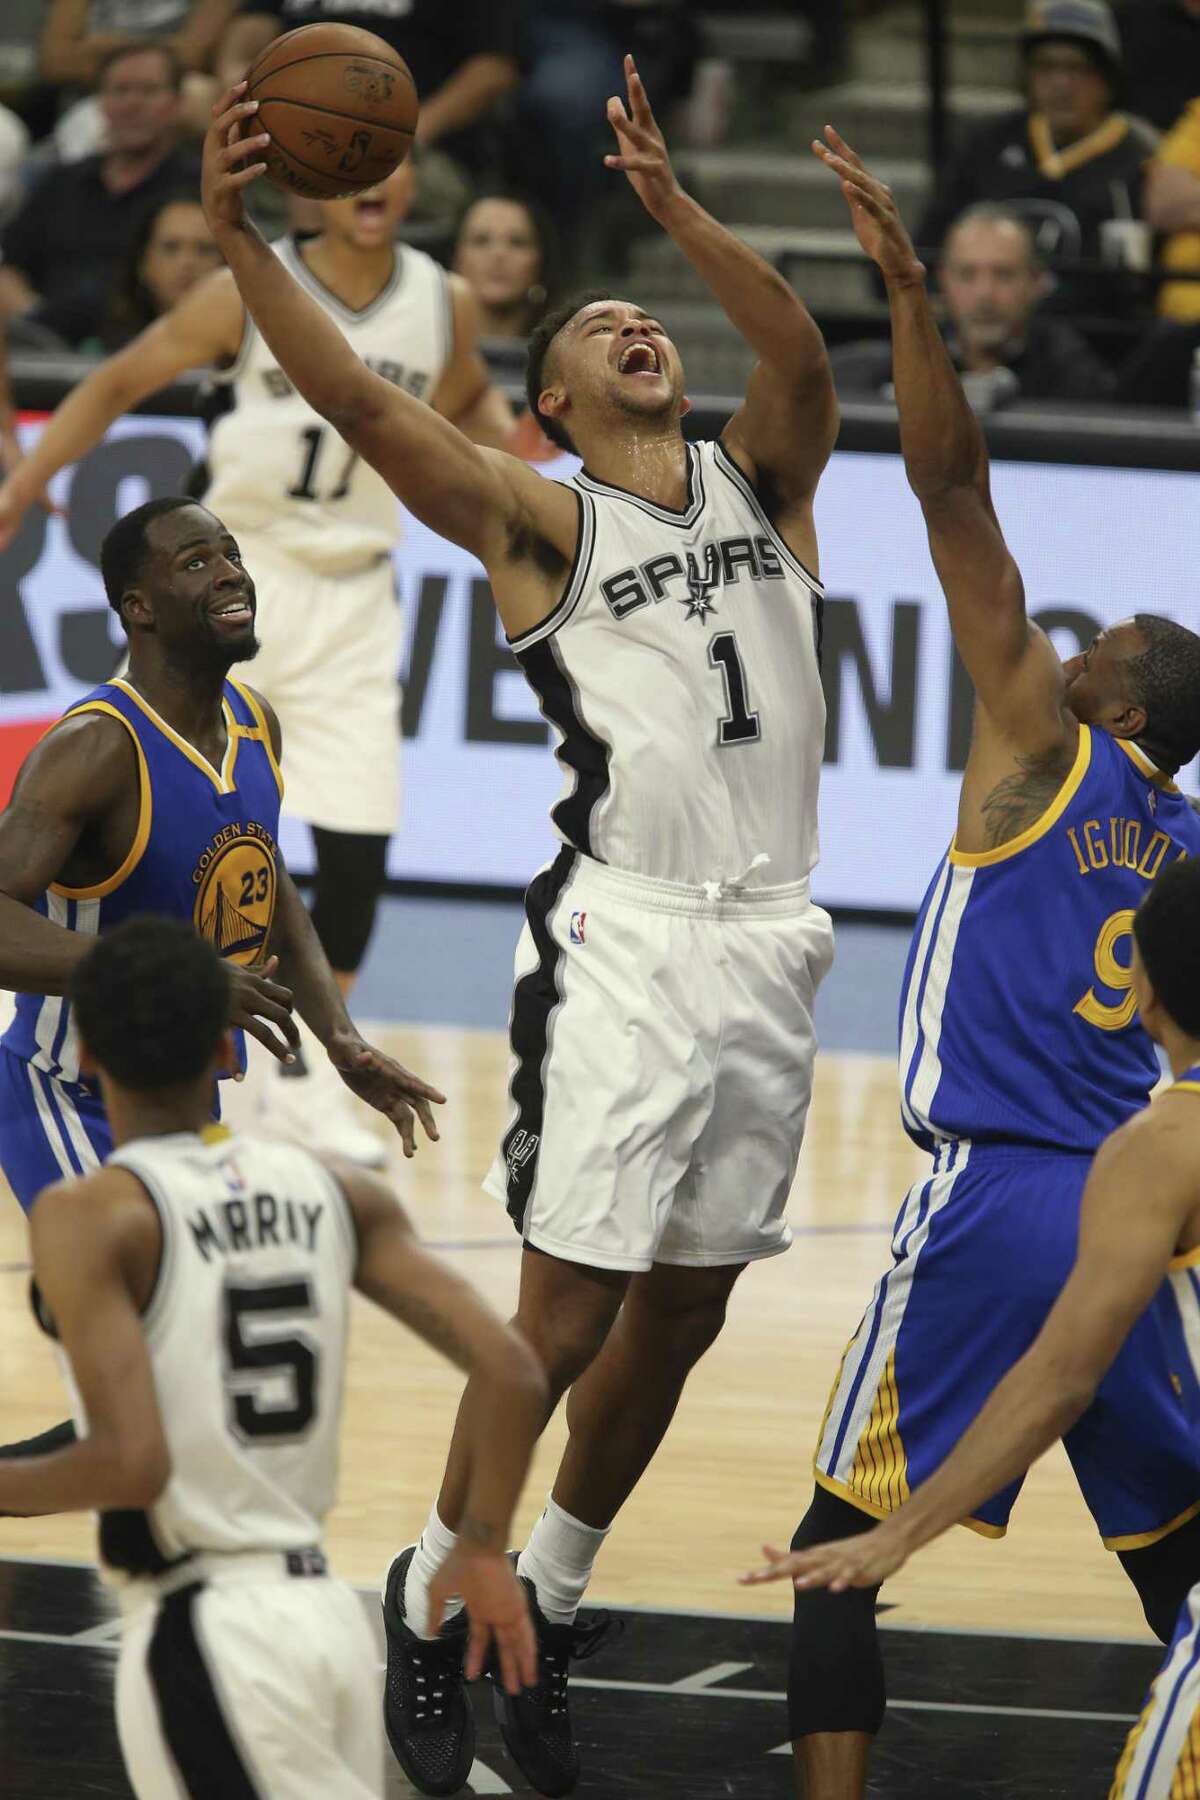 Spurs’ Kyle Anderson gets between Golden State Warriors’ Draymond Green and Andre Iguodala during the second half in Game 4 of the Western Conference finals at the AT&T Center on May 22, 2017.